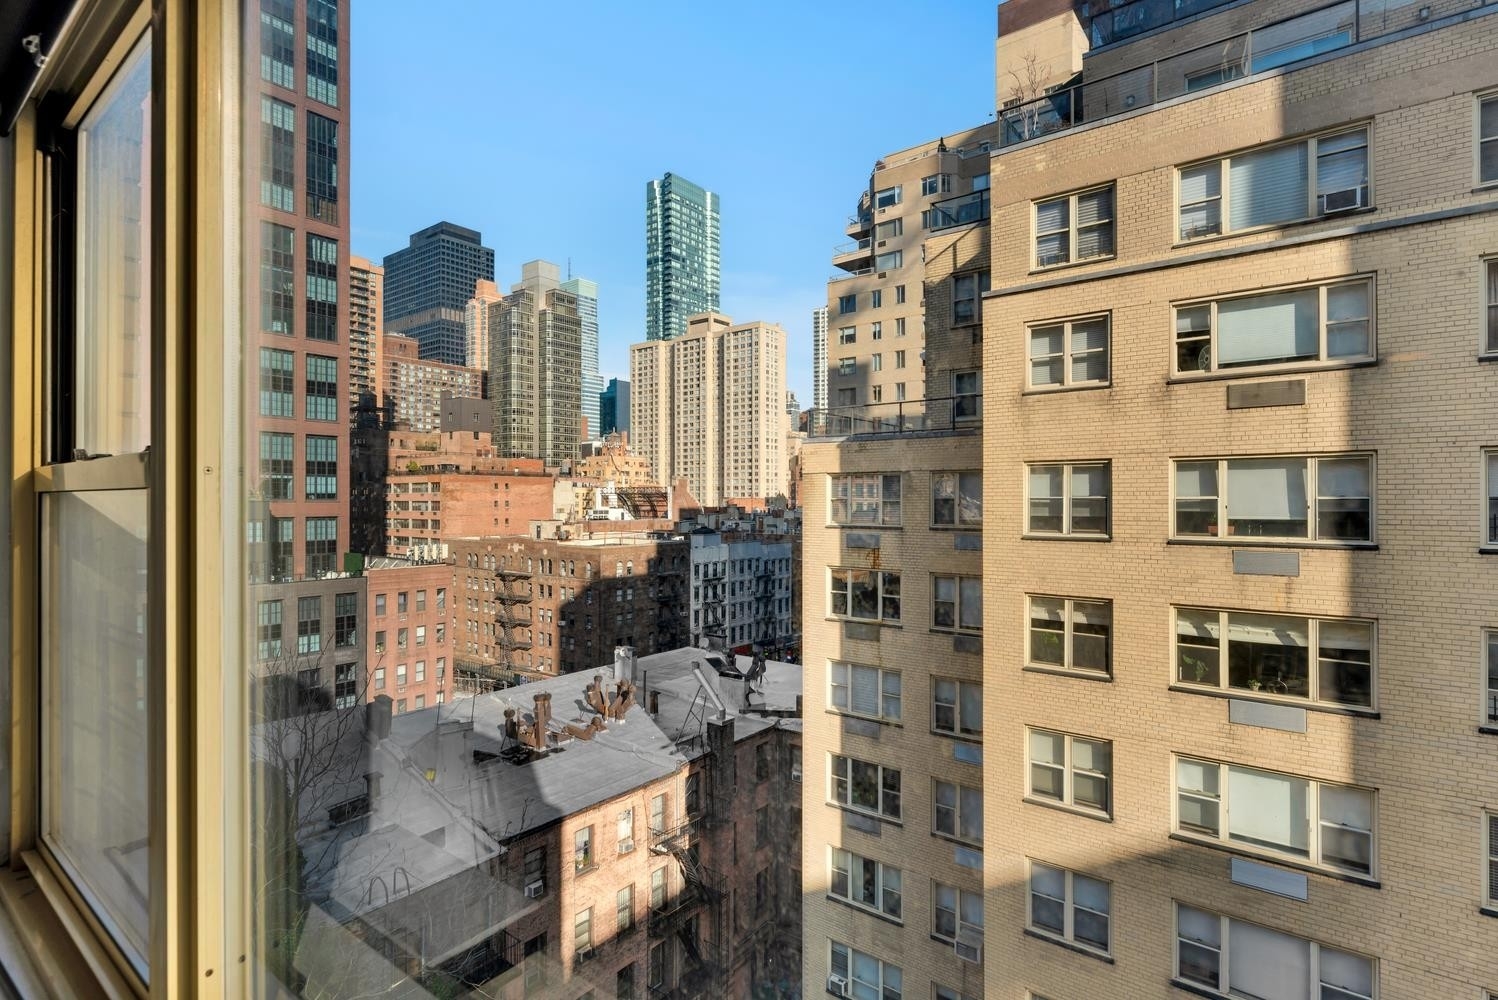 Co-op Properties for Sale at Sutton House, 415 E 52ND ST, 9AA Beekman, New York, NY 10022